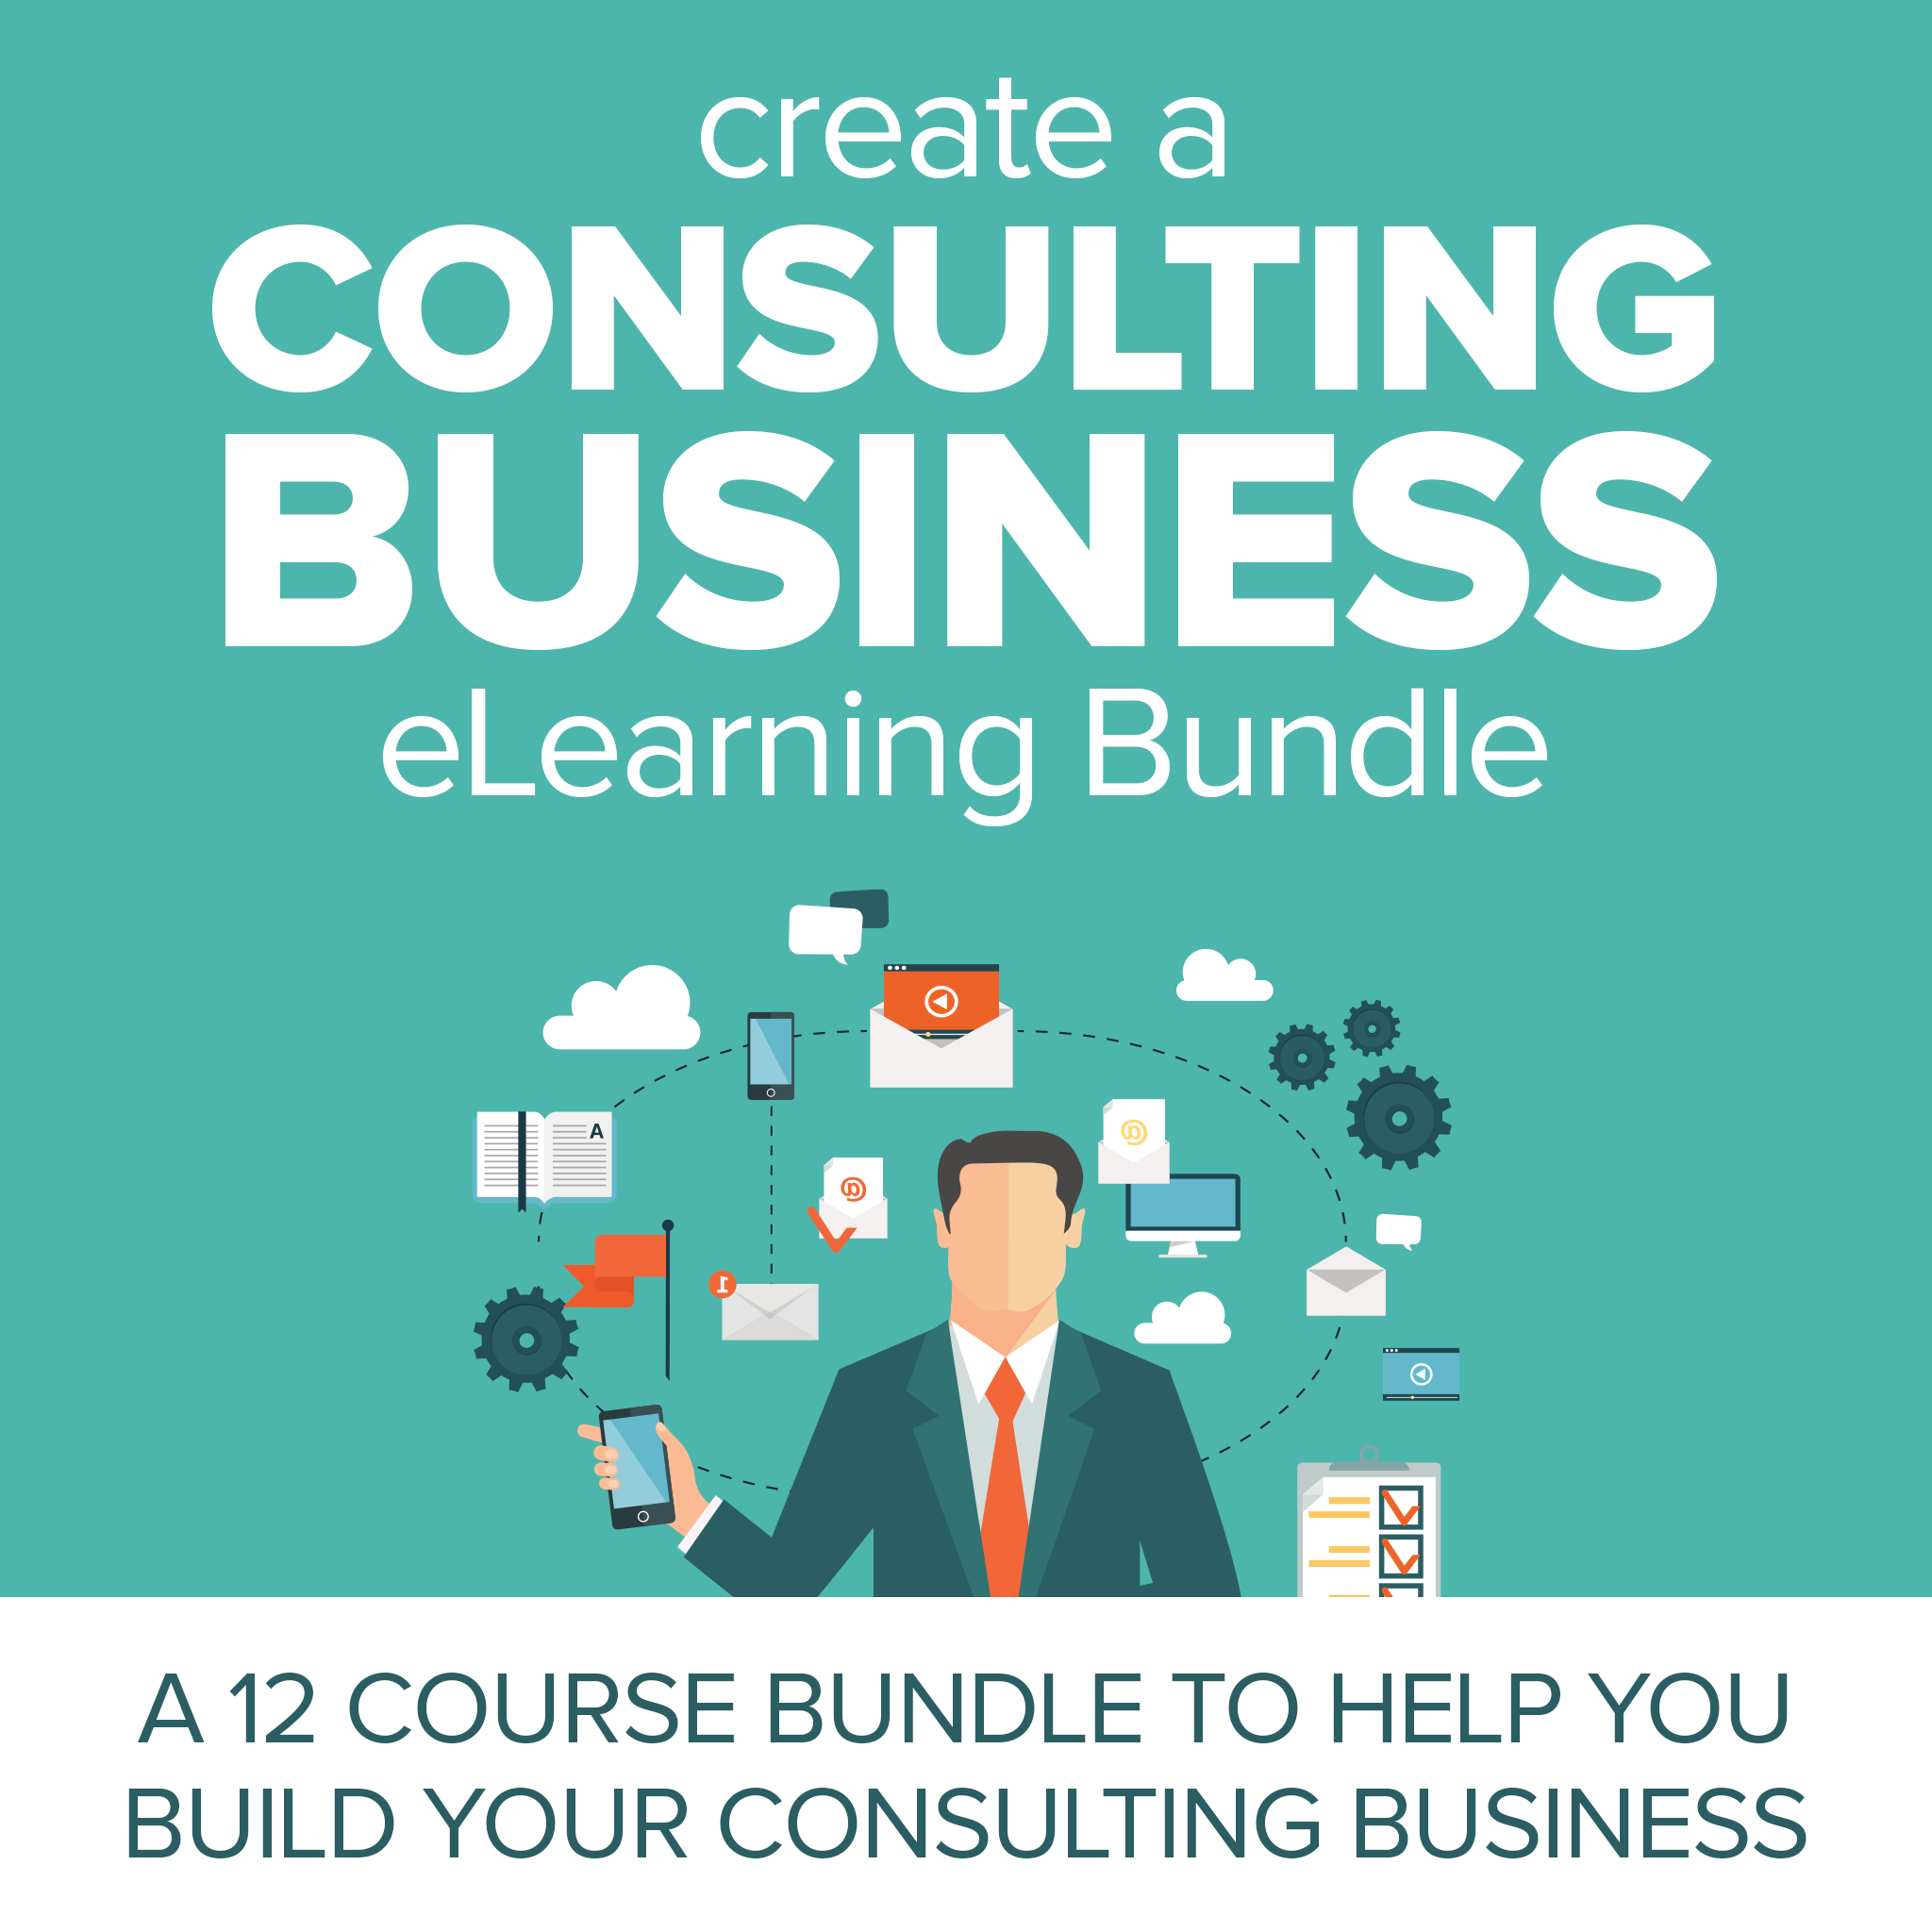 Create a Consulting Business eLearning Bundle